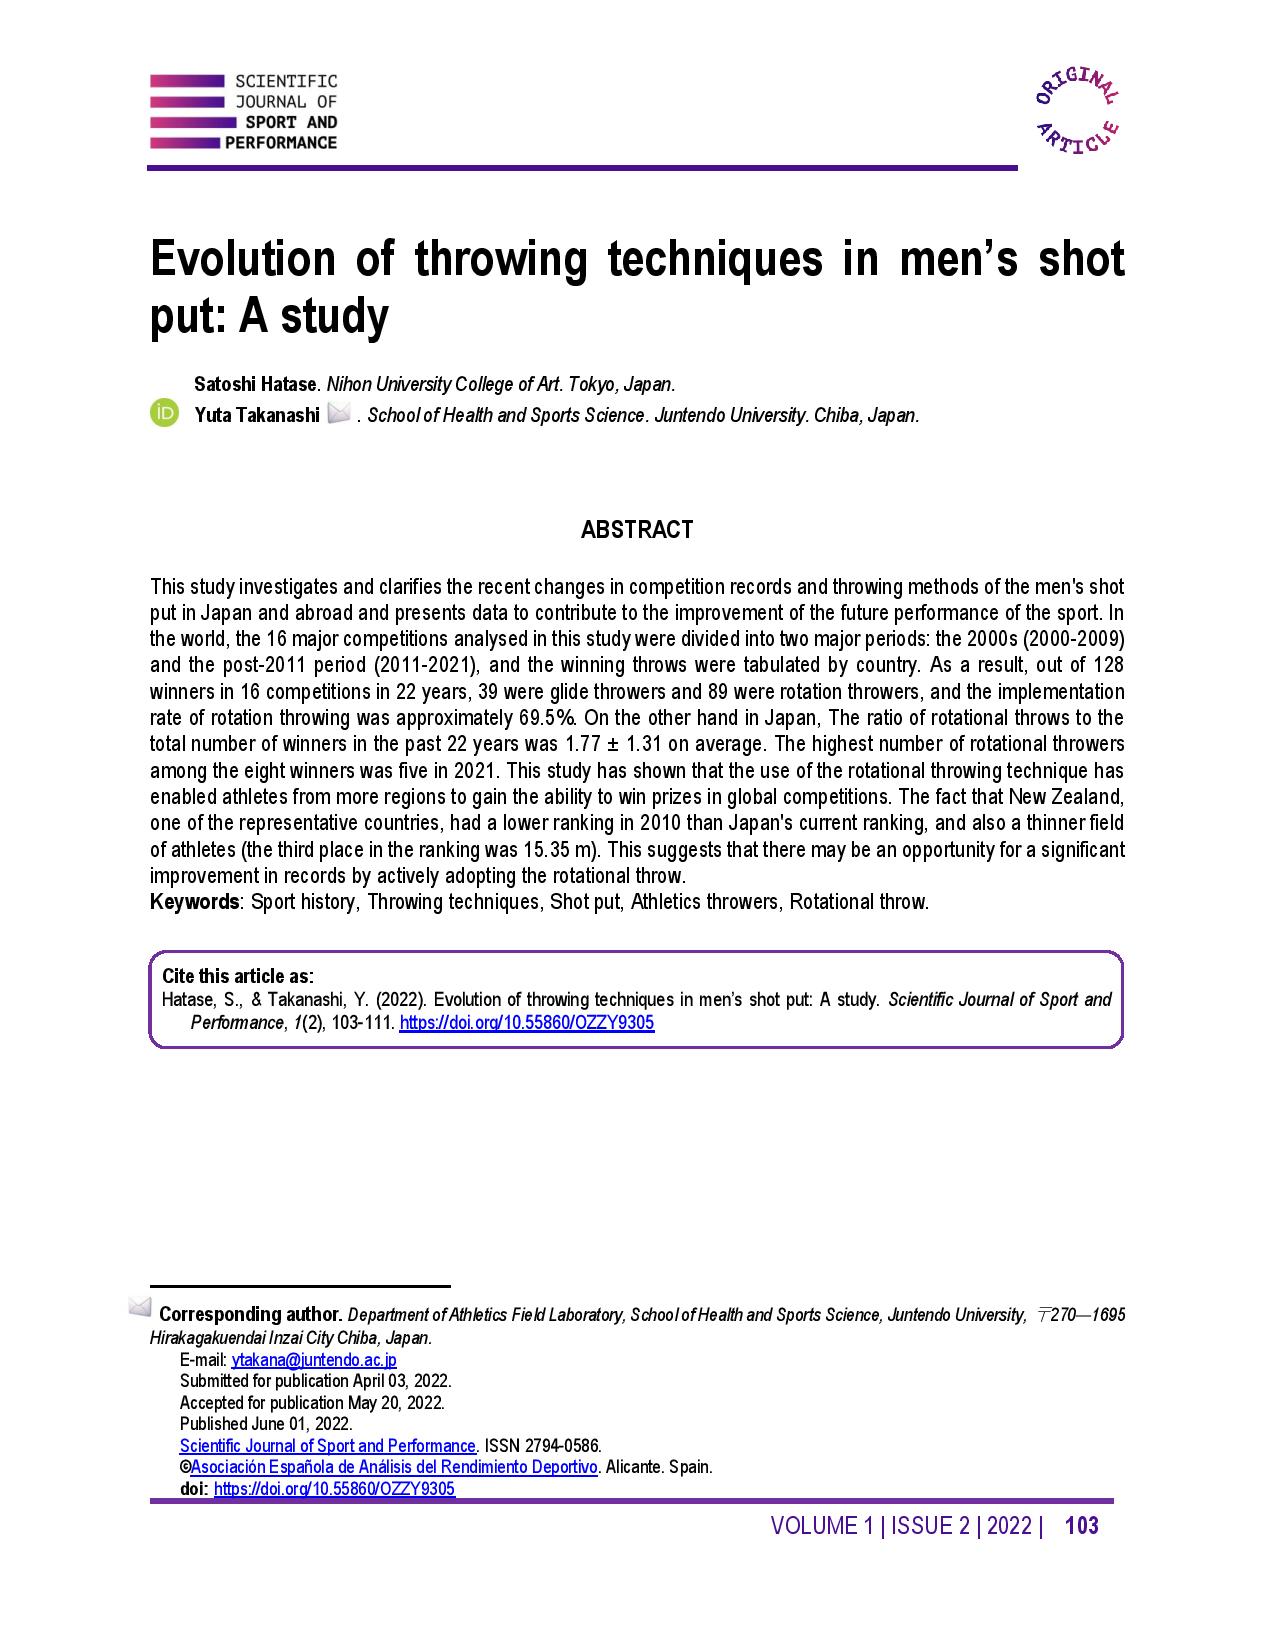 Evolution of throwing techniques in men’s shot put: A study